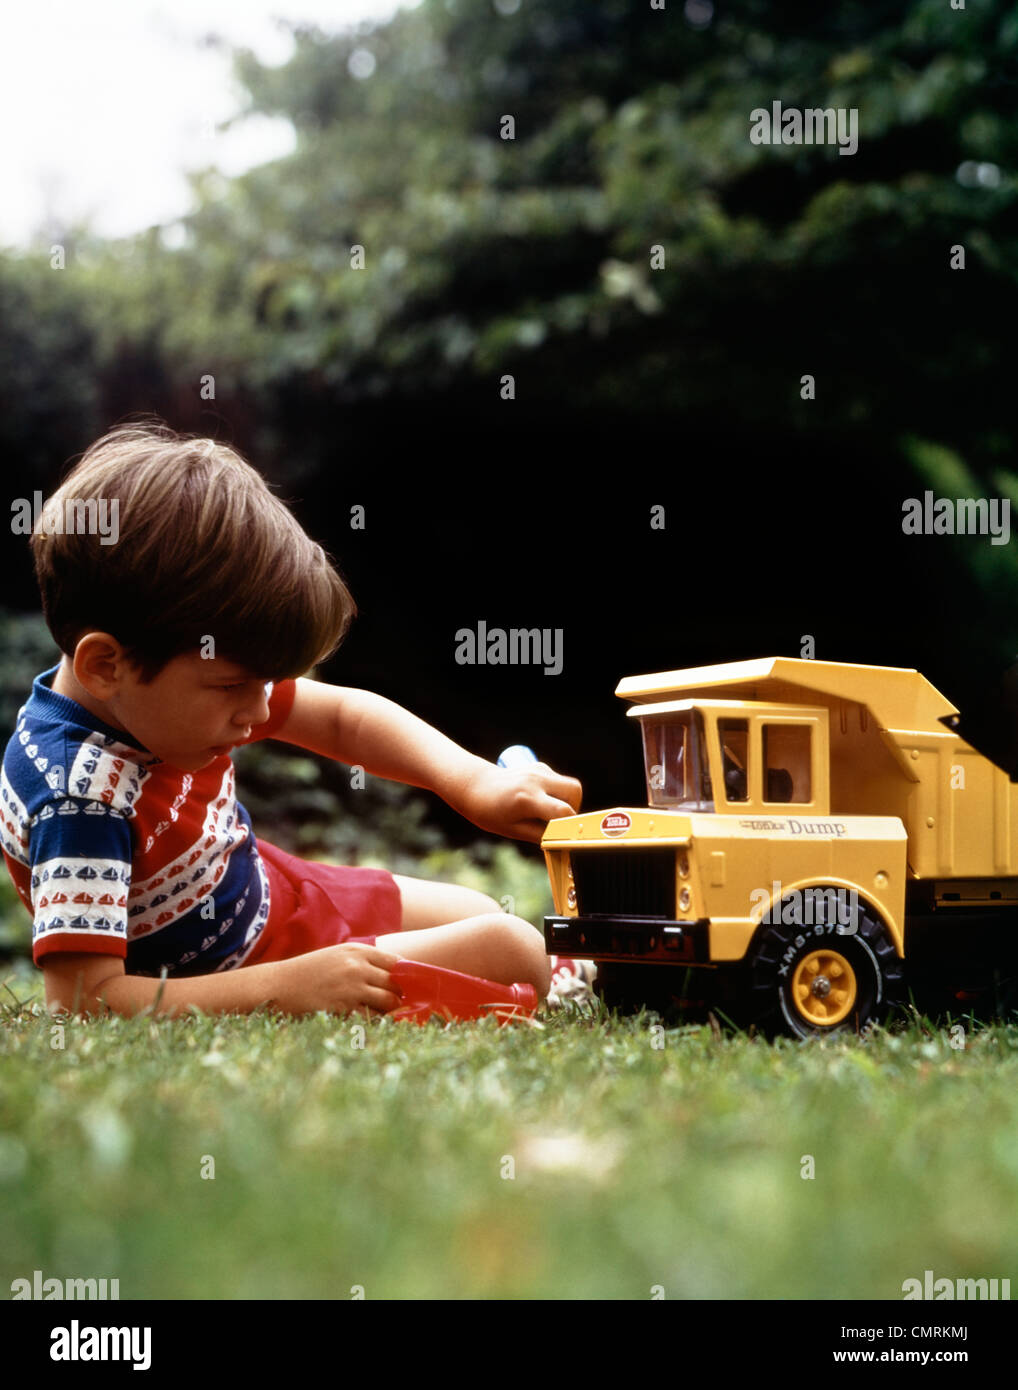 1970s BOY IN GRASS PLAYING WITH TONKA TOY YELLOW DUMP TRUCK Stock Photo